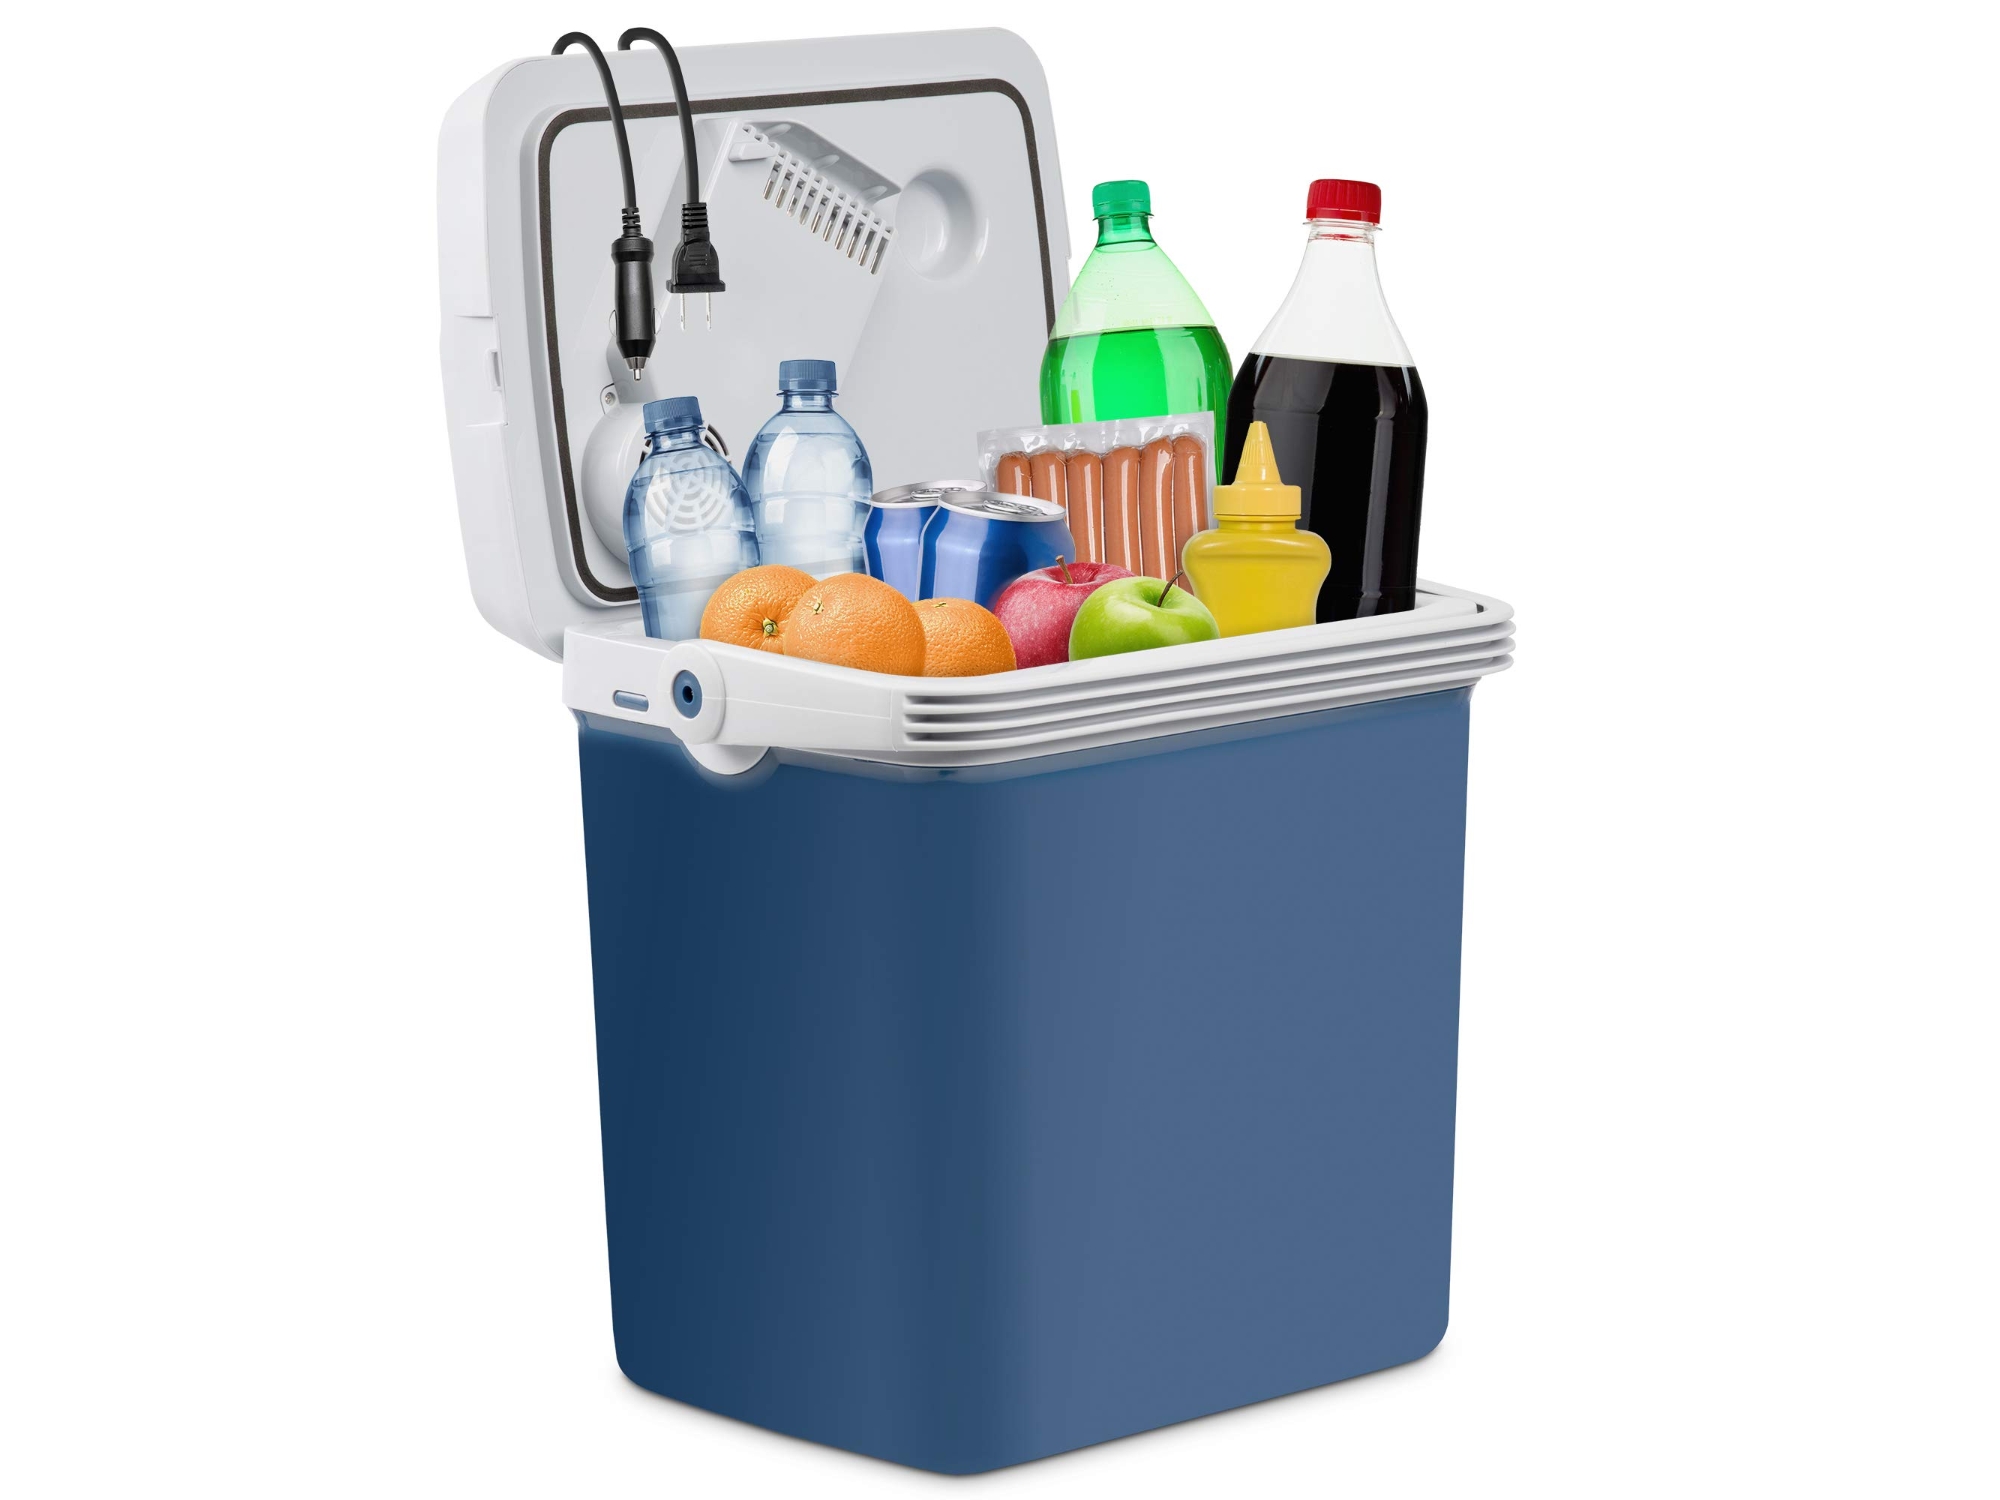 Image of Ivation 25L Electric Cooler & Warmer Portable Car Fridge with Handle ID 843812138321